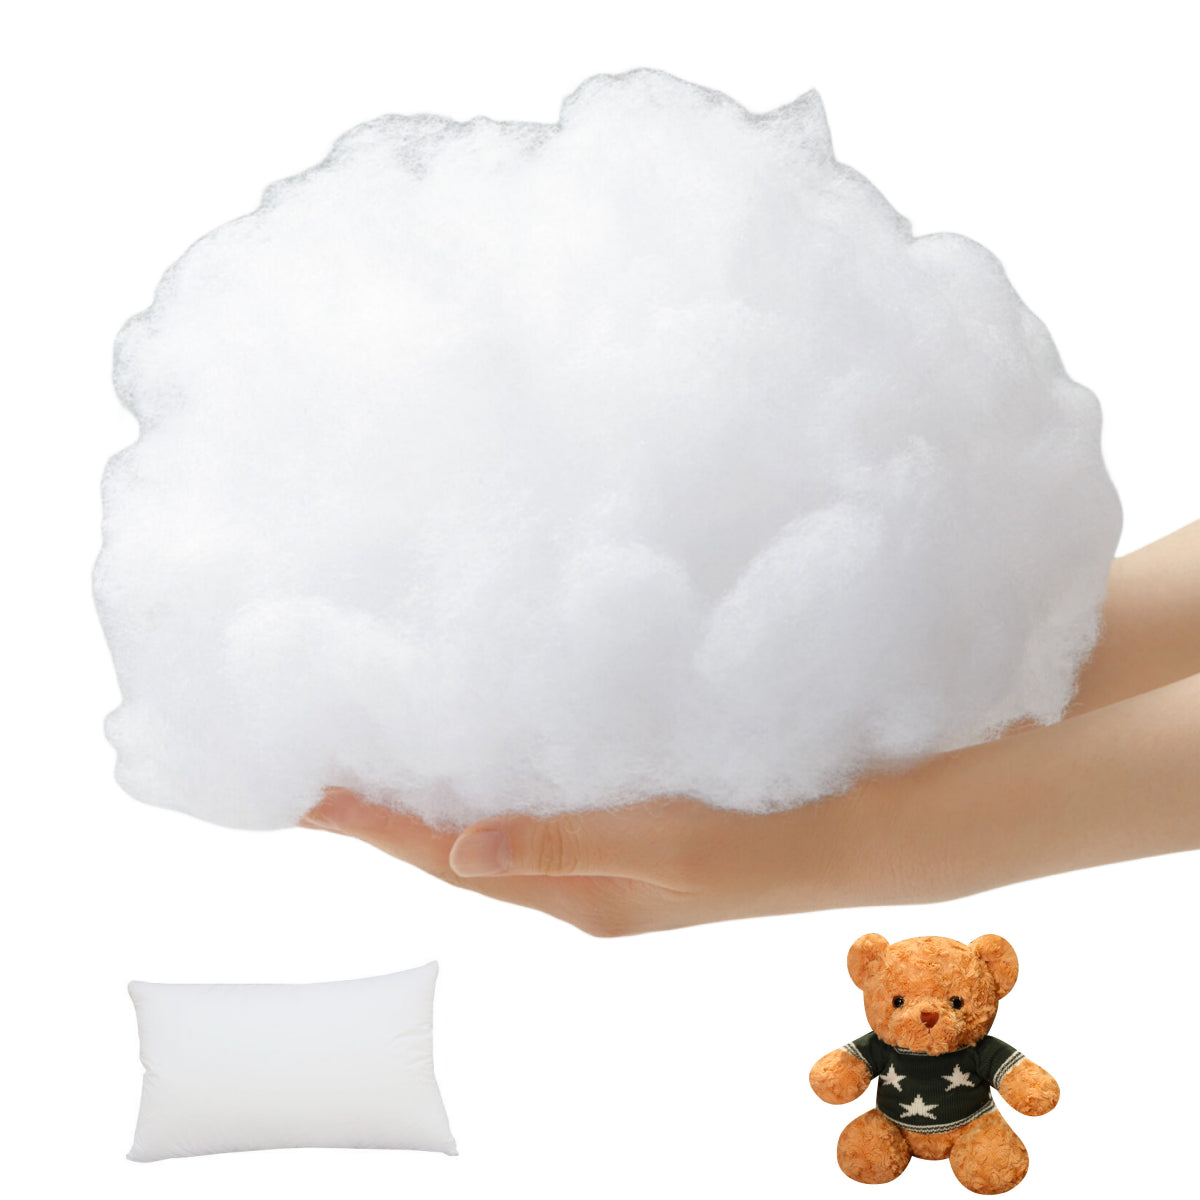 White Premium High Resilience Fiber Fill, Recycled Polyester Fiber, Stuffing for Stuffed Animals Pillow 2 kg